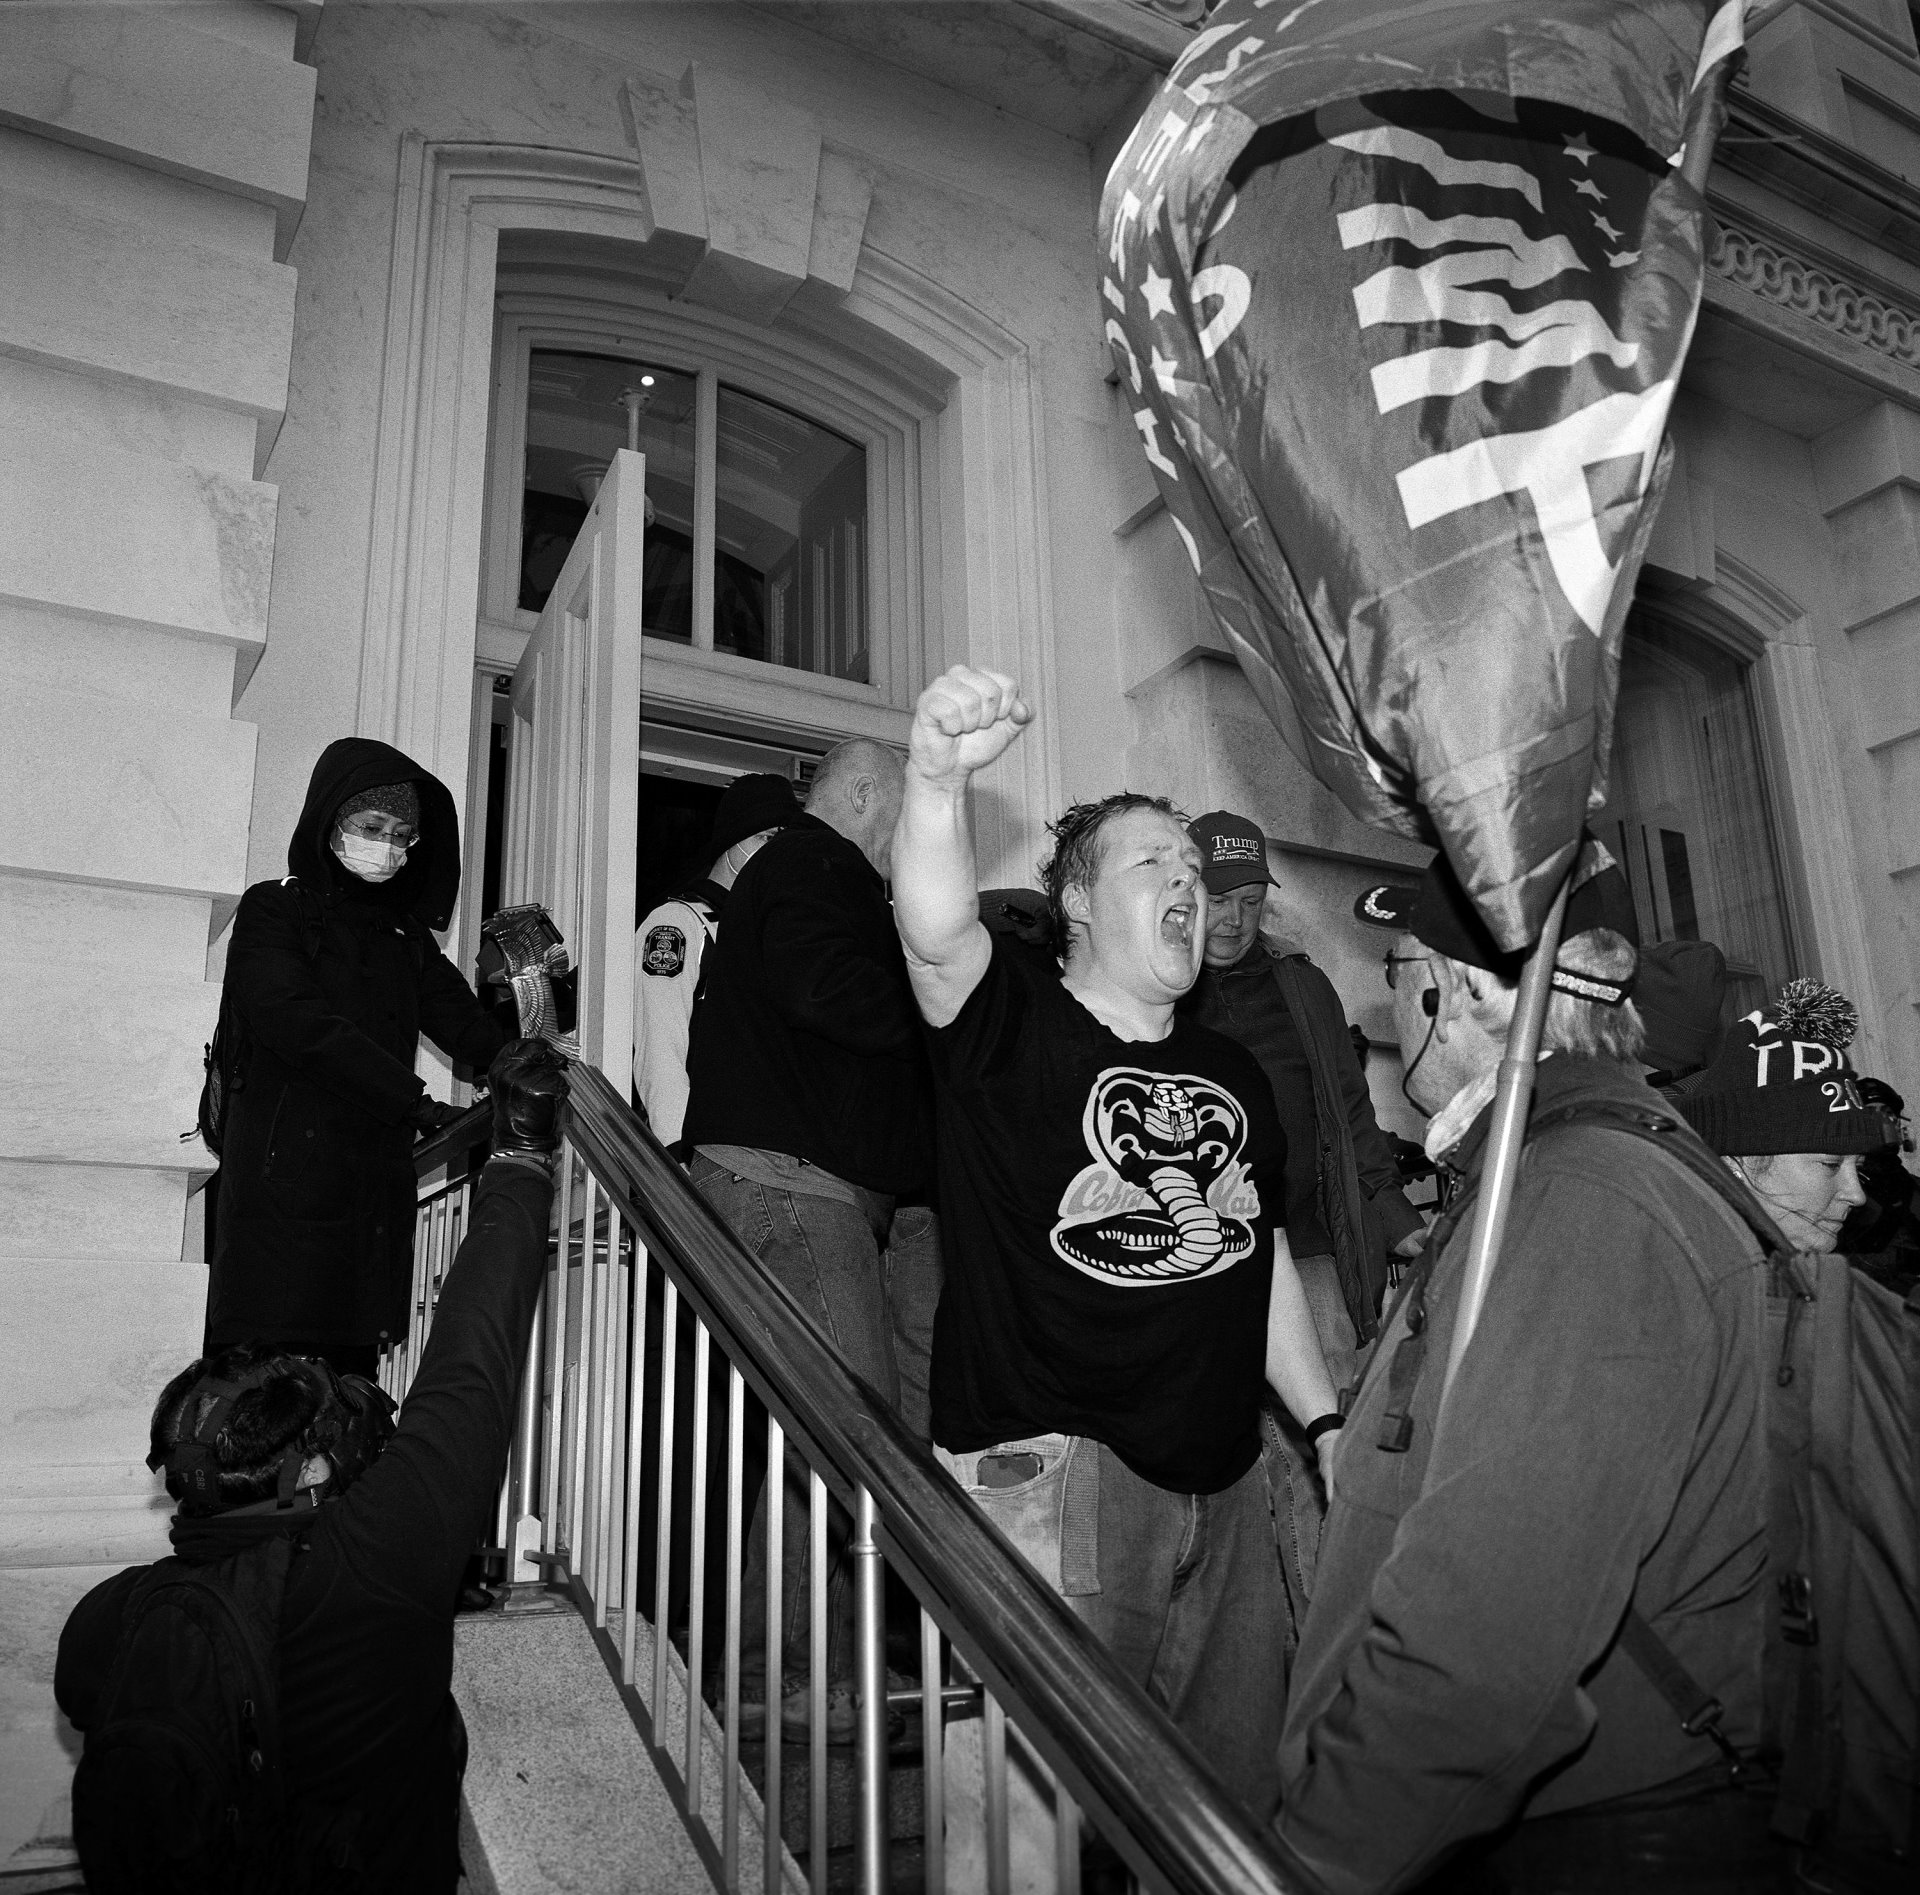 A Trump supporter pumps his fist as he is ejected from the Capitol Building, after it had been breached by rioters in an attempt to stop the certification of the 2020 presidential election, Washington DC, USA.